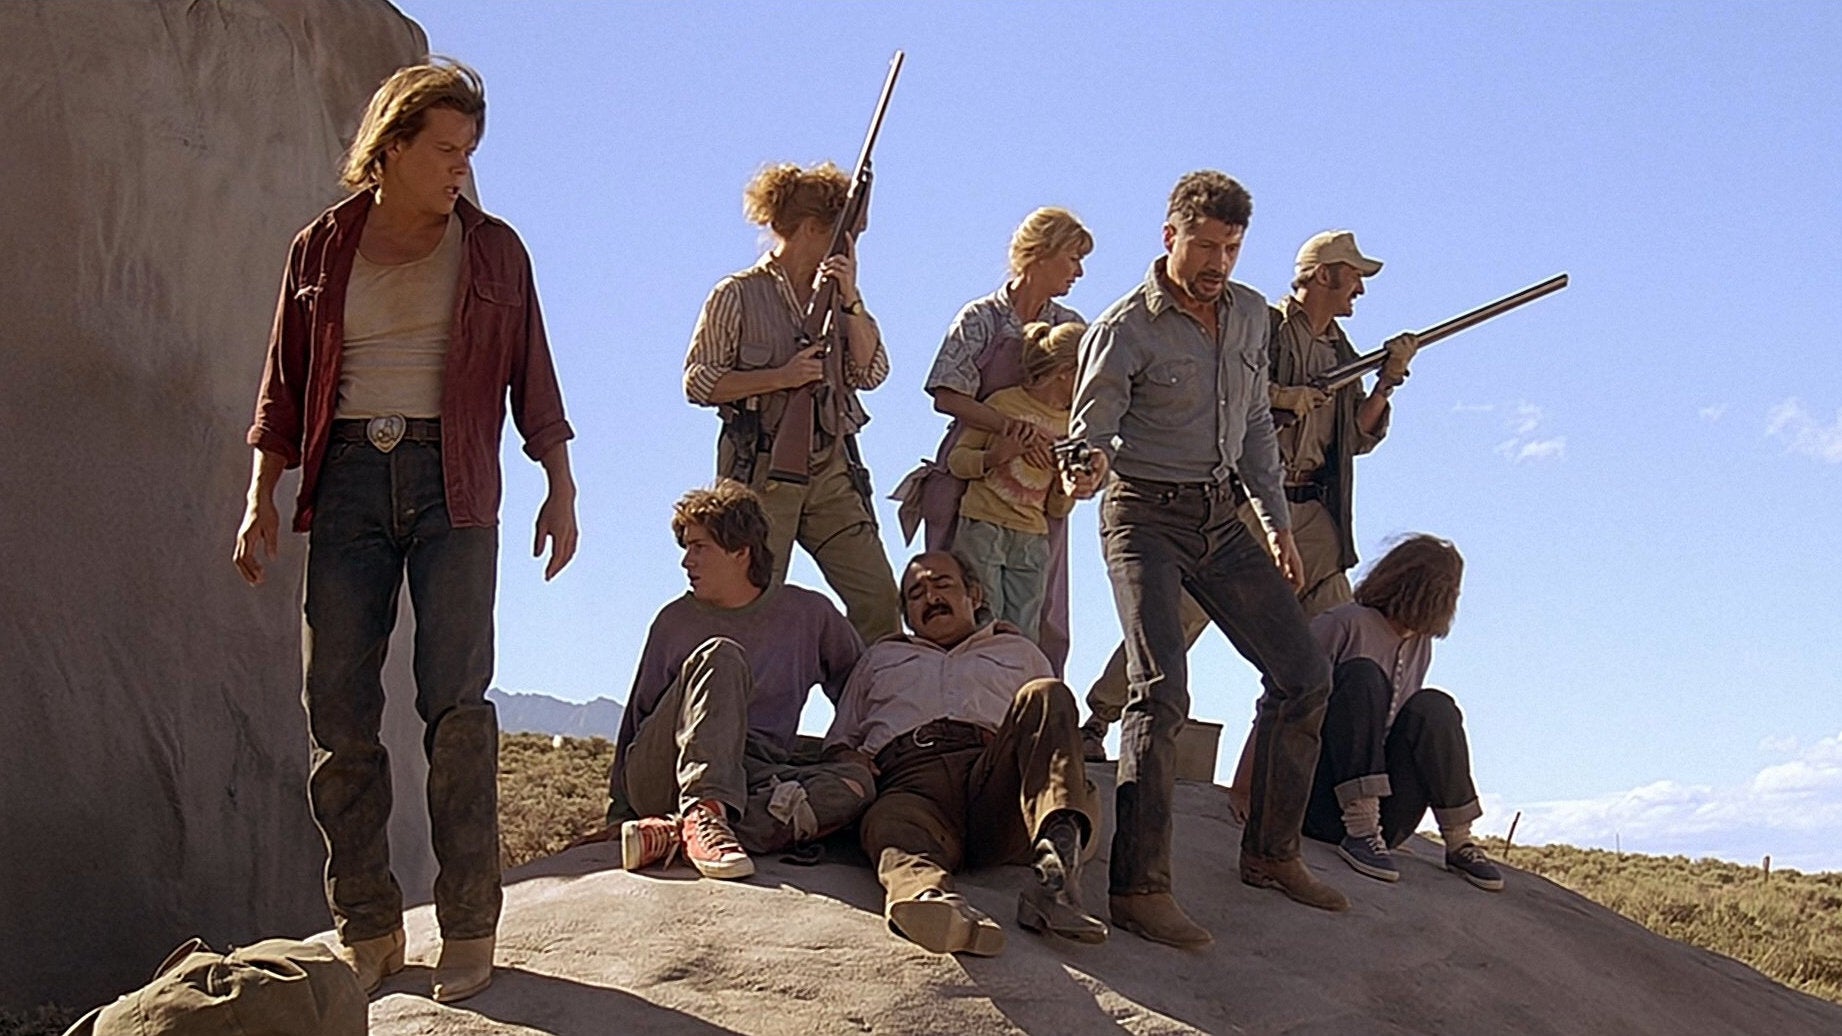 Kevin Bacon and friends hide on a rock in Tremors.